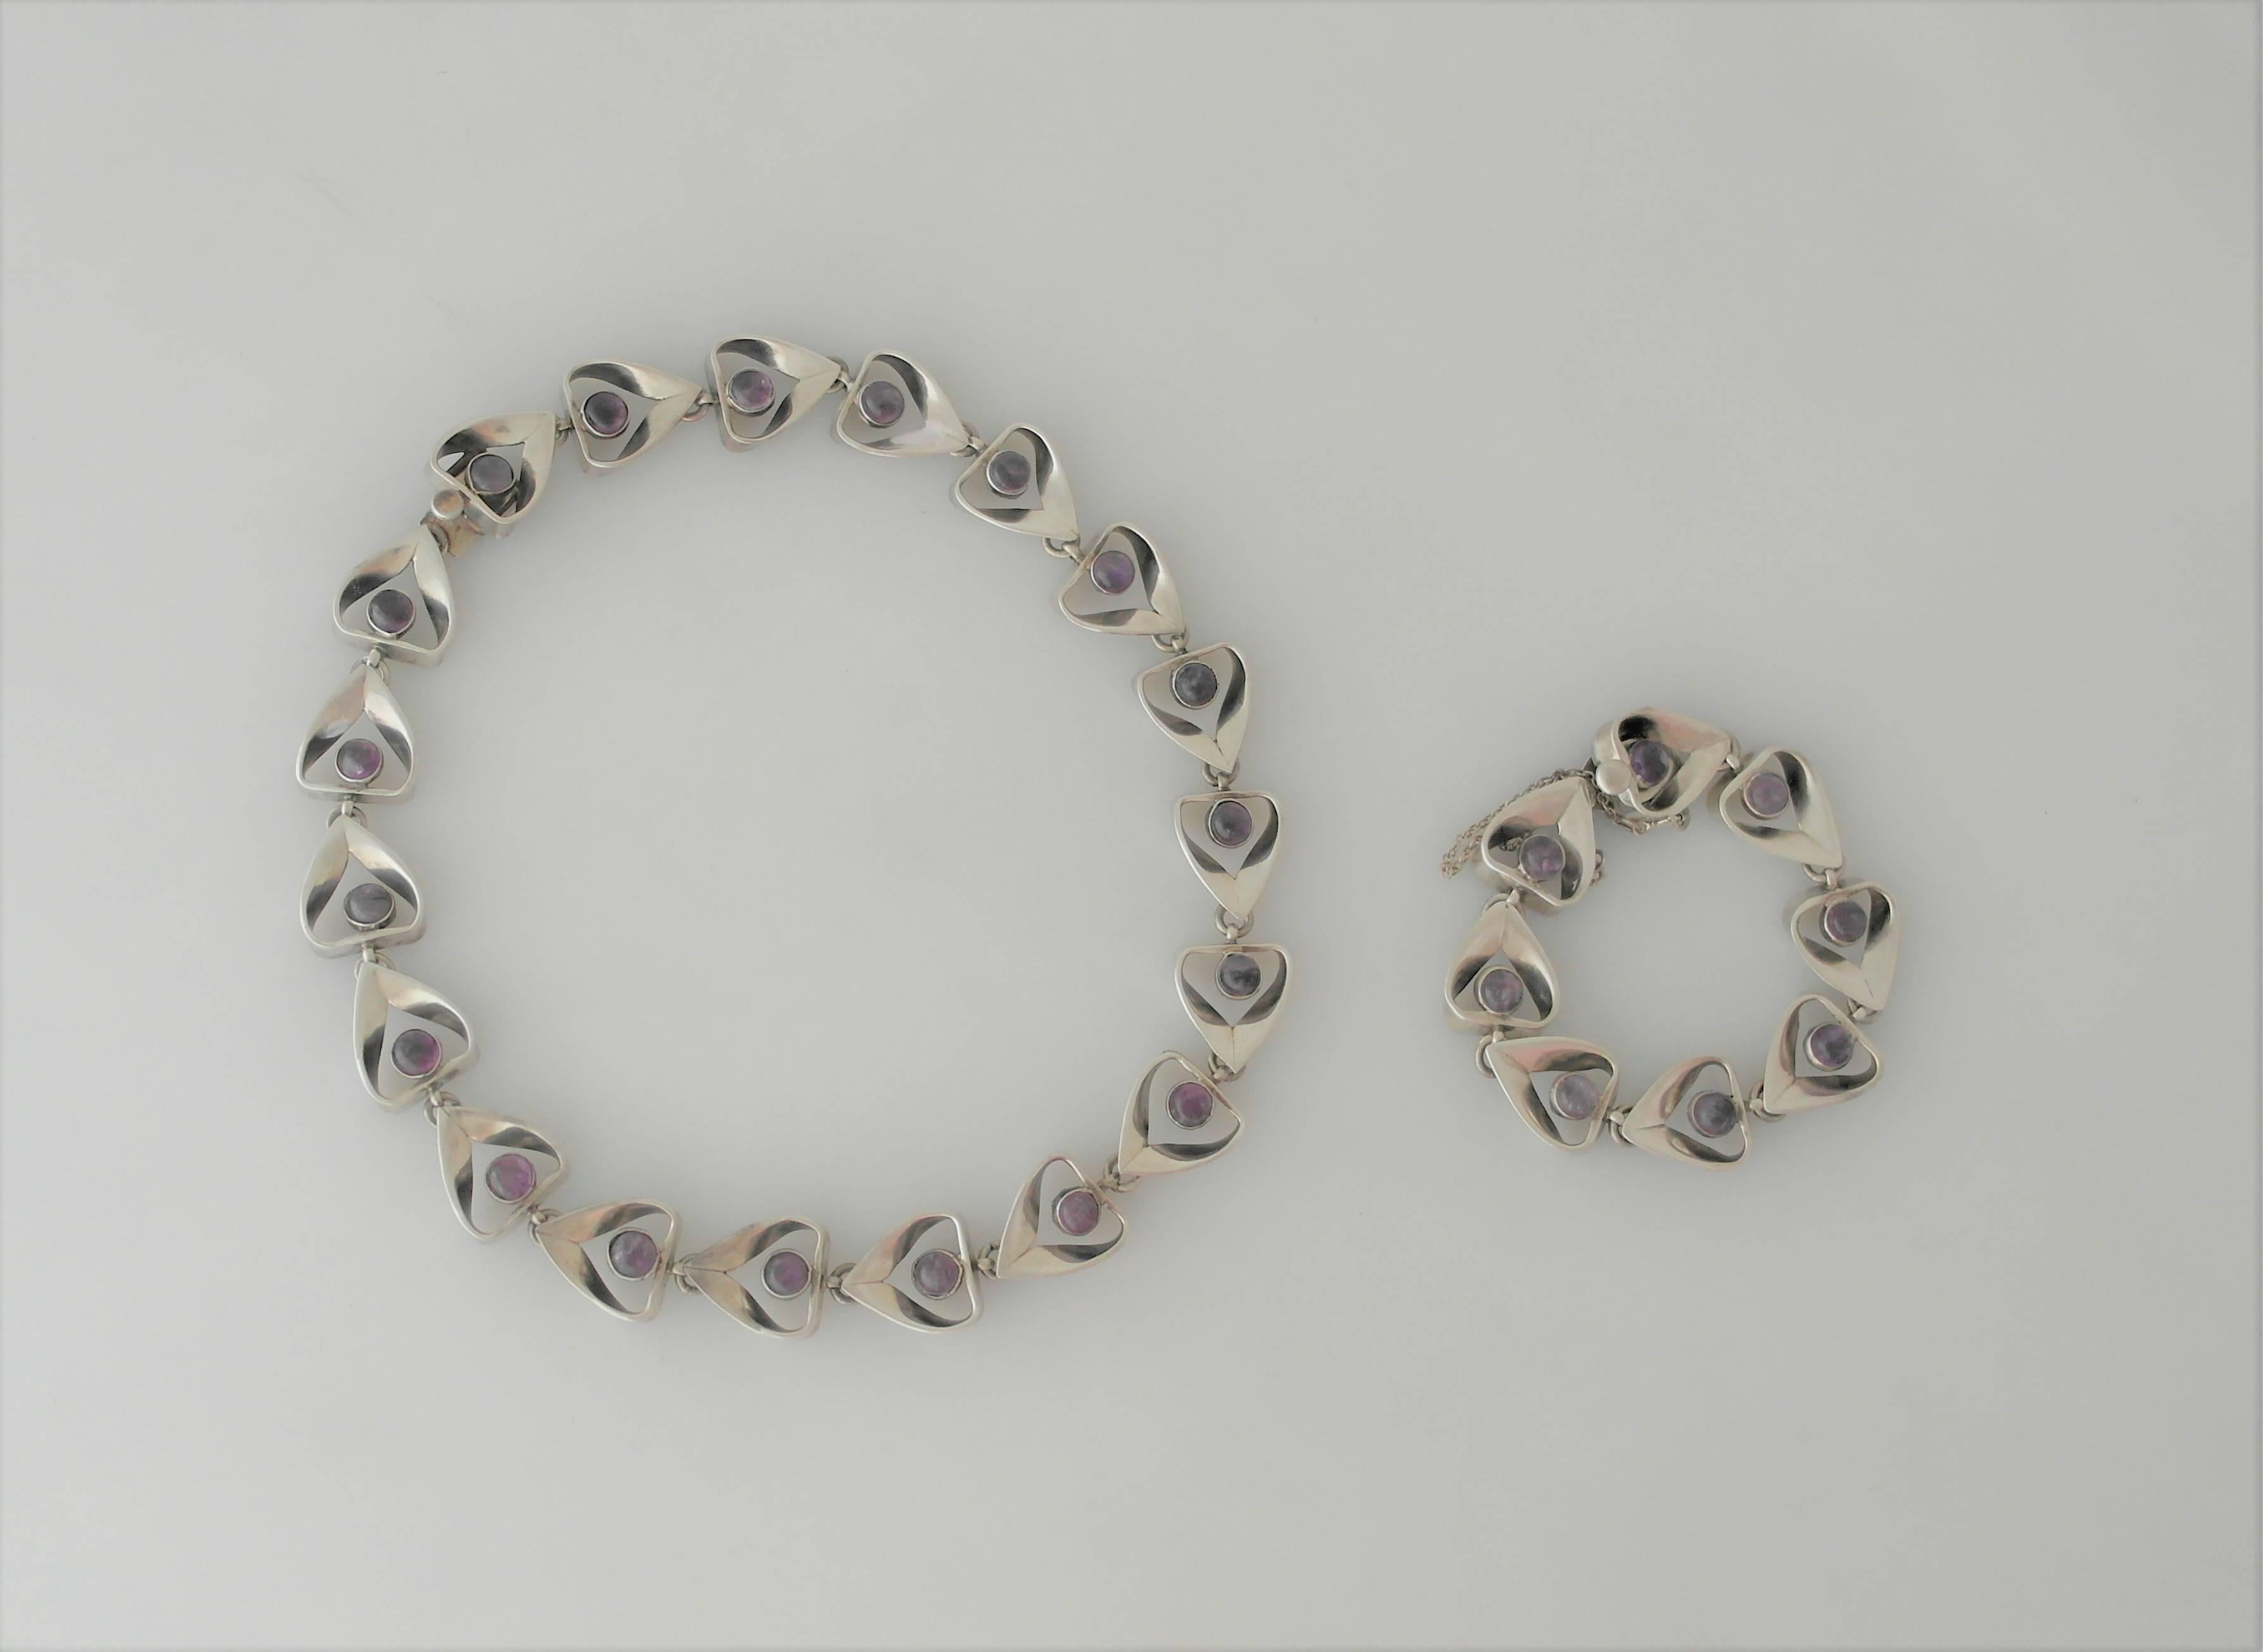 Being offered are a necklace and bracelet set by Emma Melendez of Taxco, Mexico.